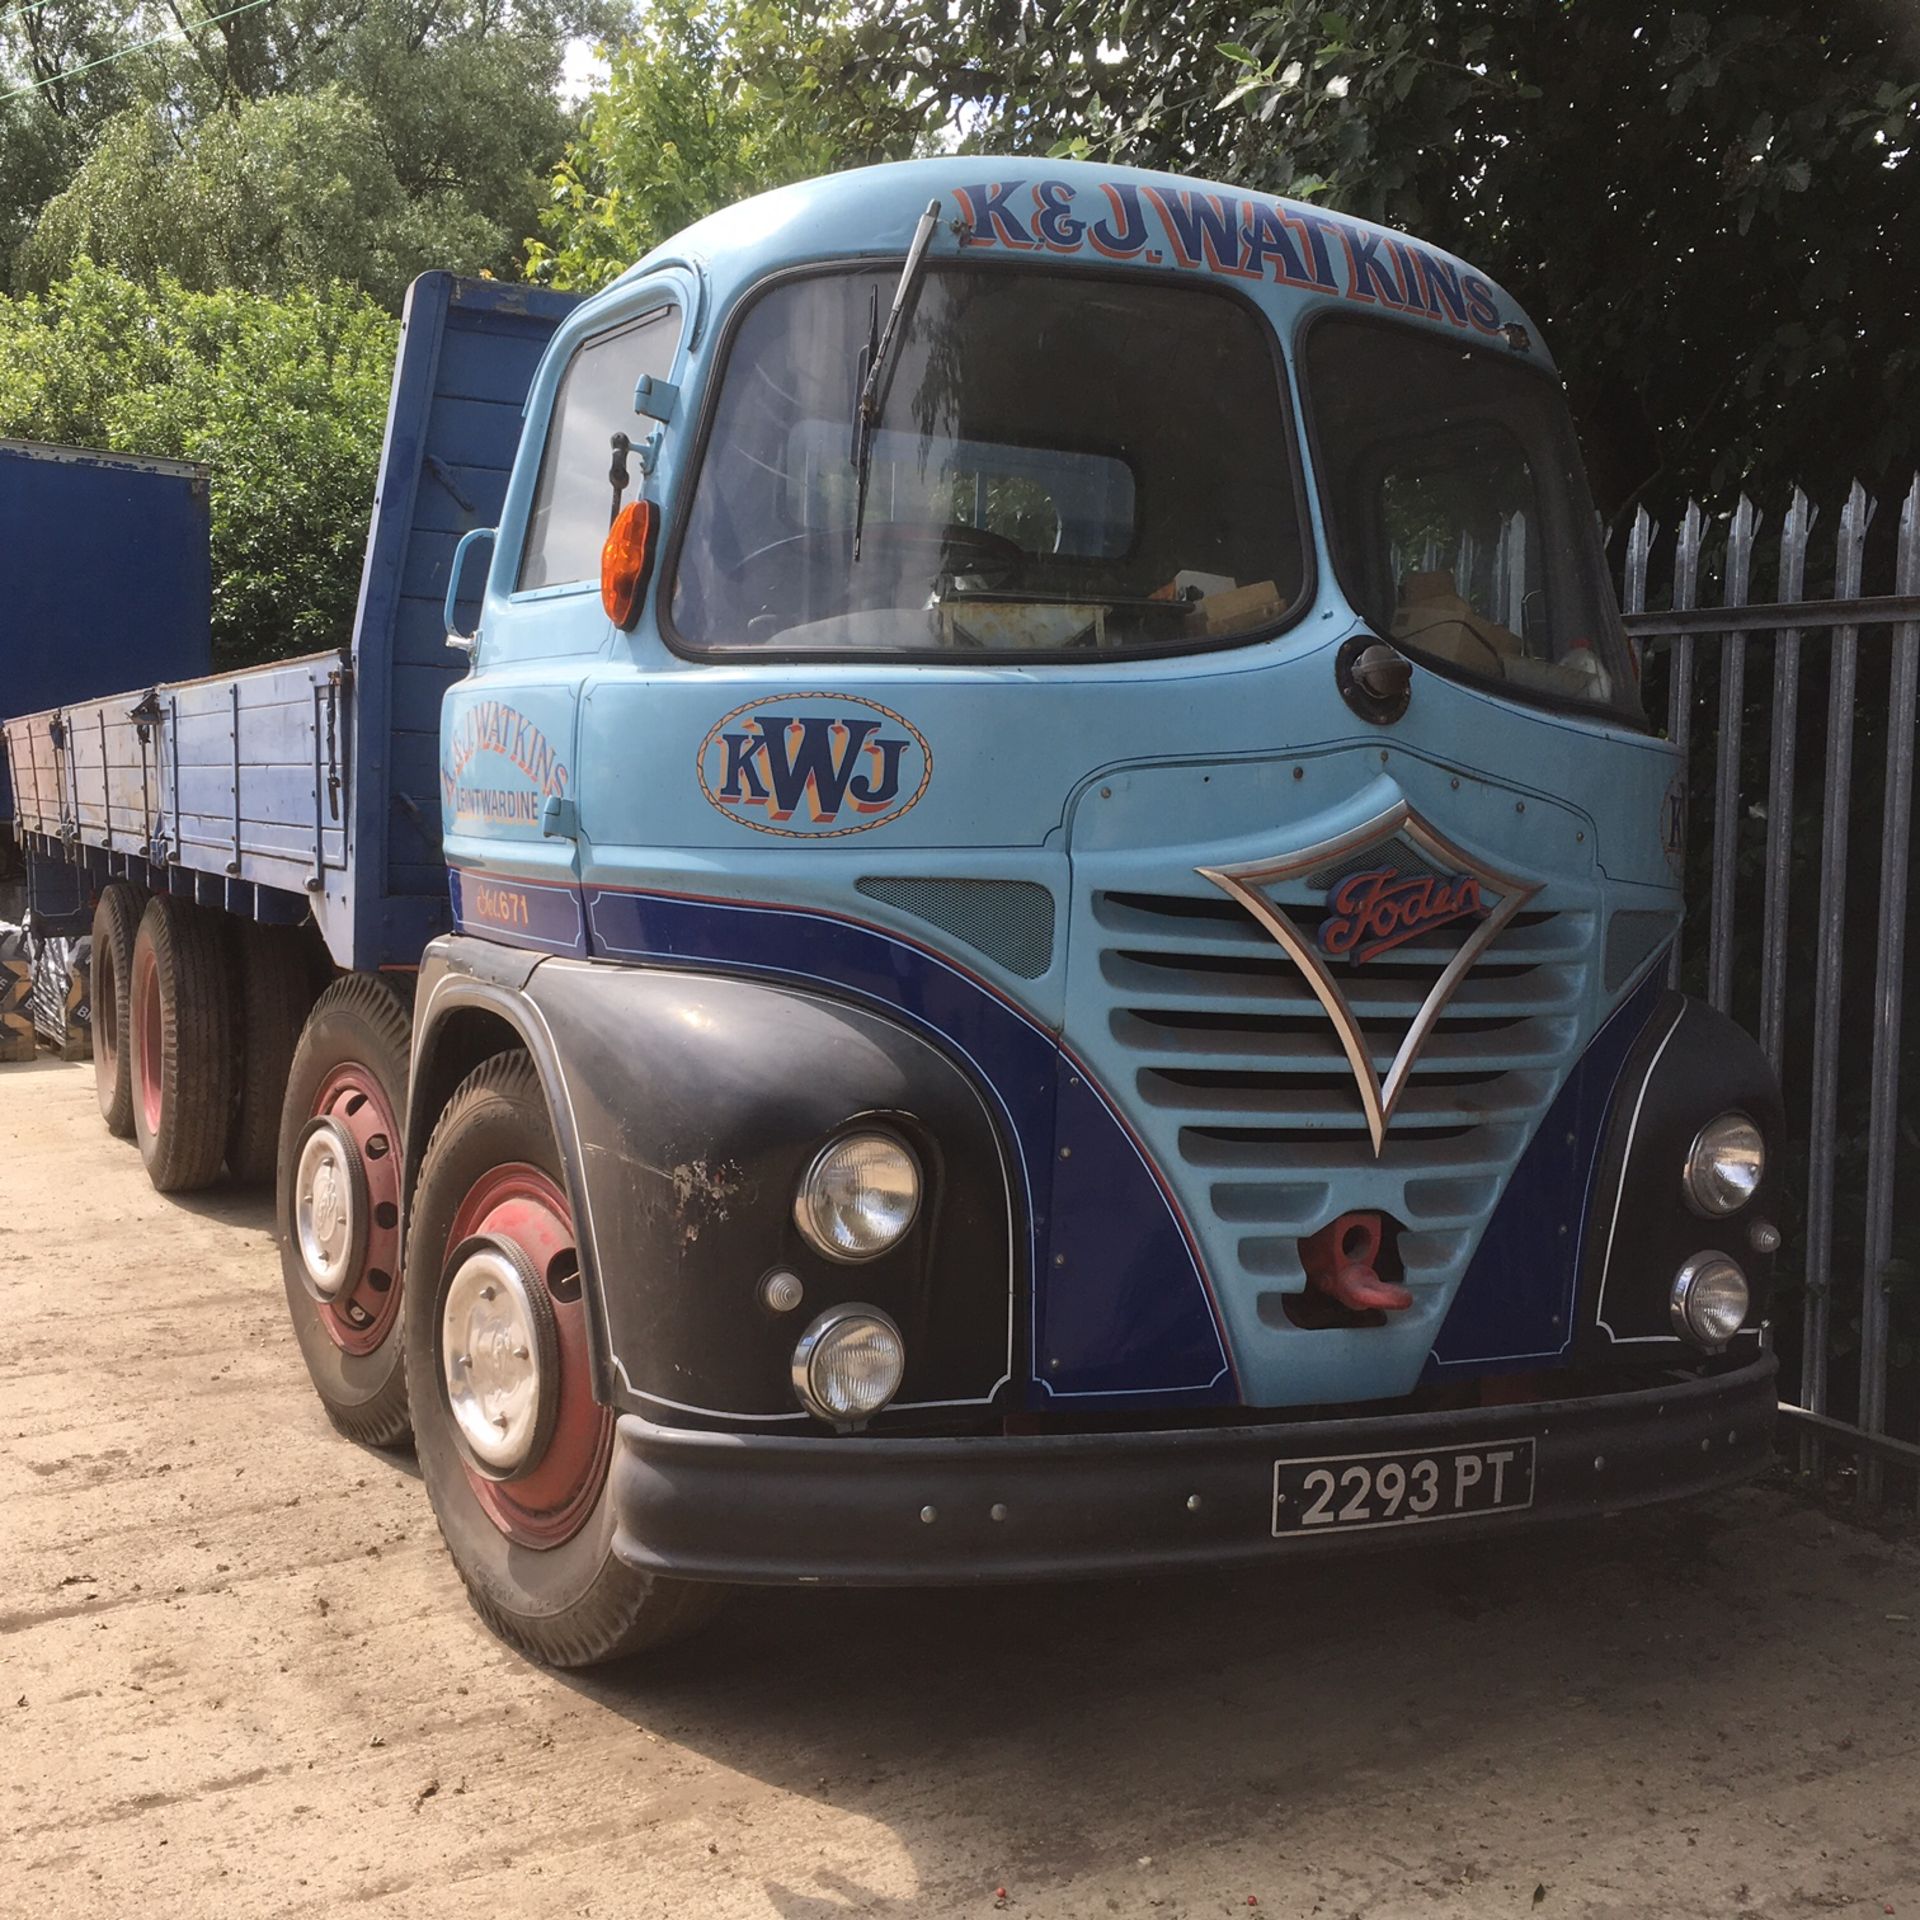 1961 FODEN S21 8 wheel dropside LORRY Reg. No. 2293 PT Chassis No. 47278 Liveried for K & J